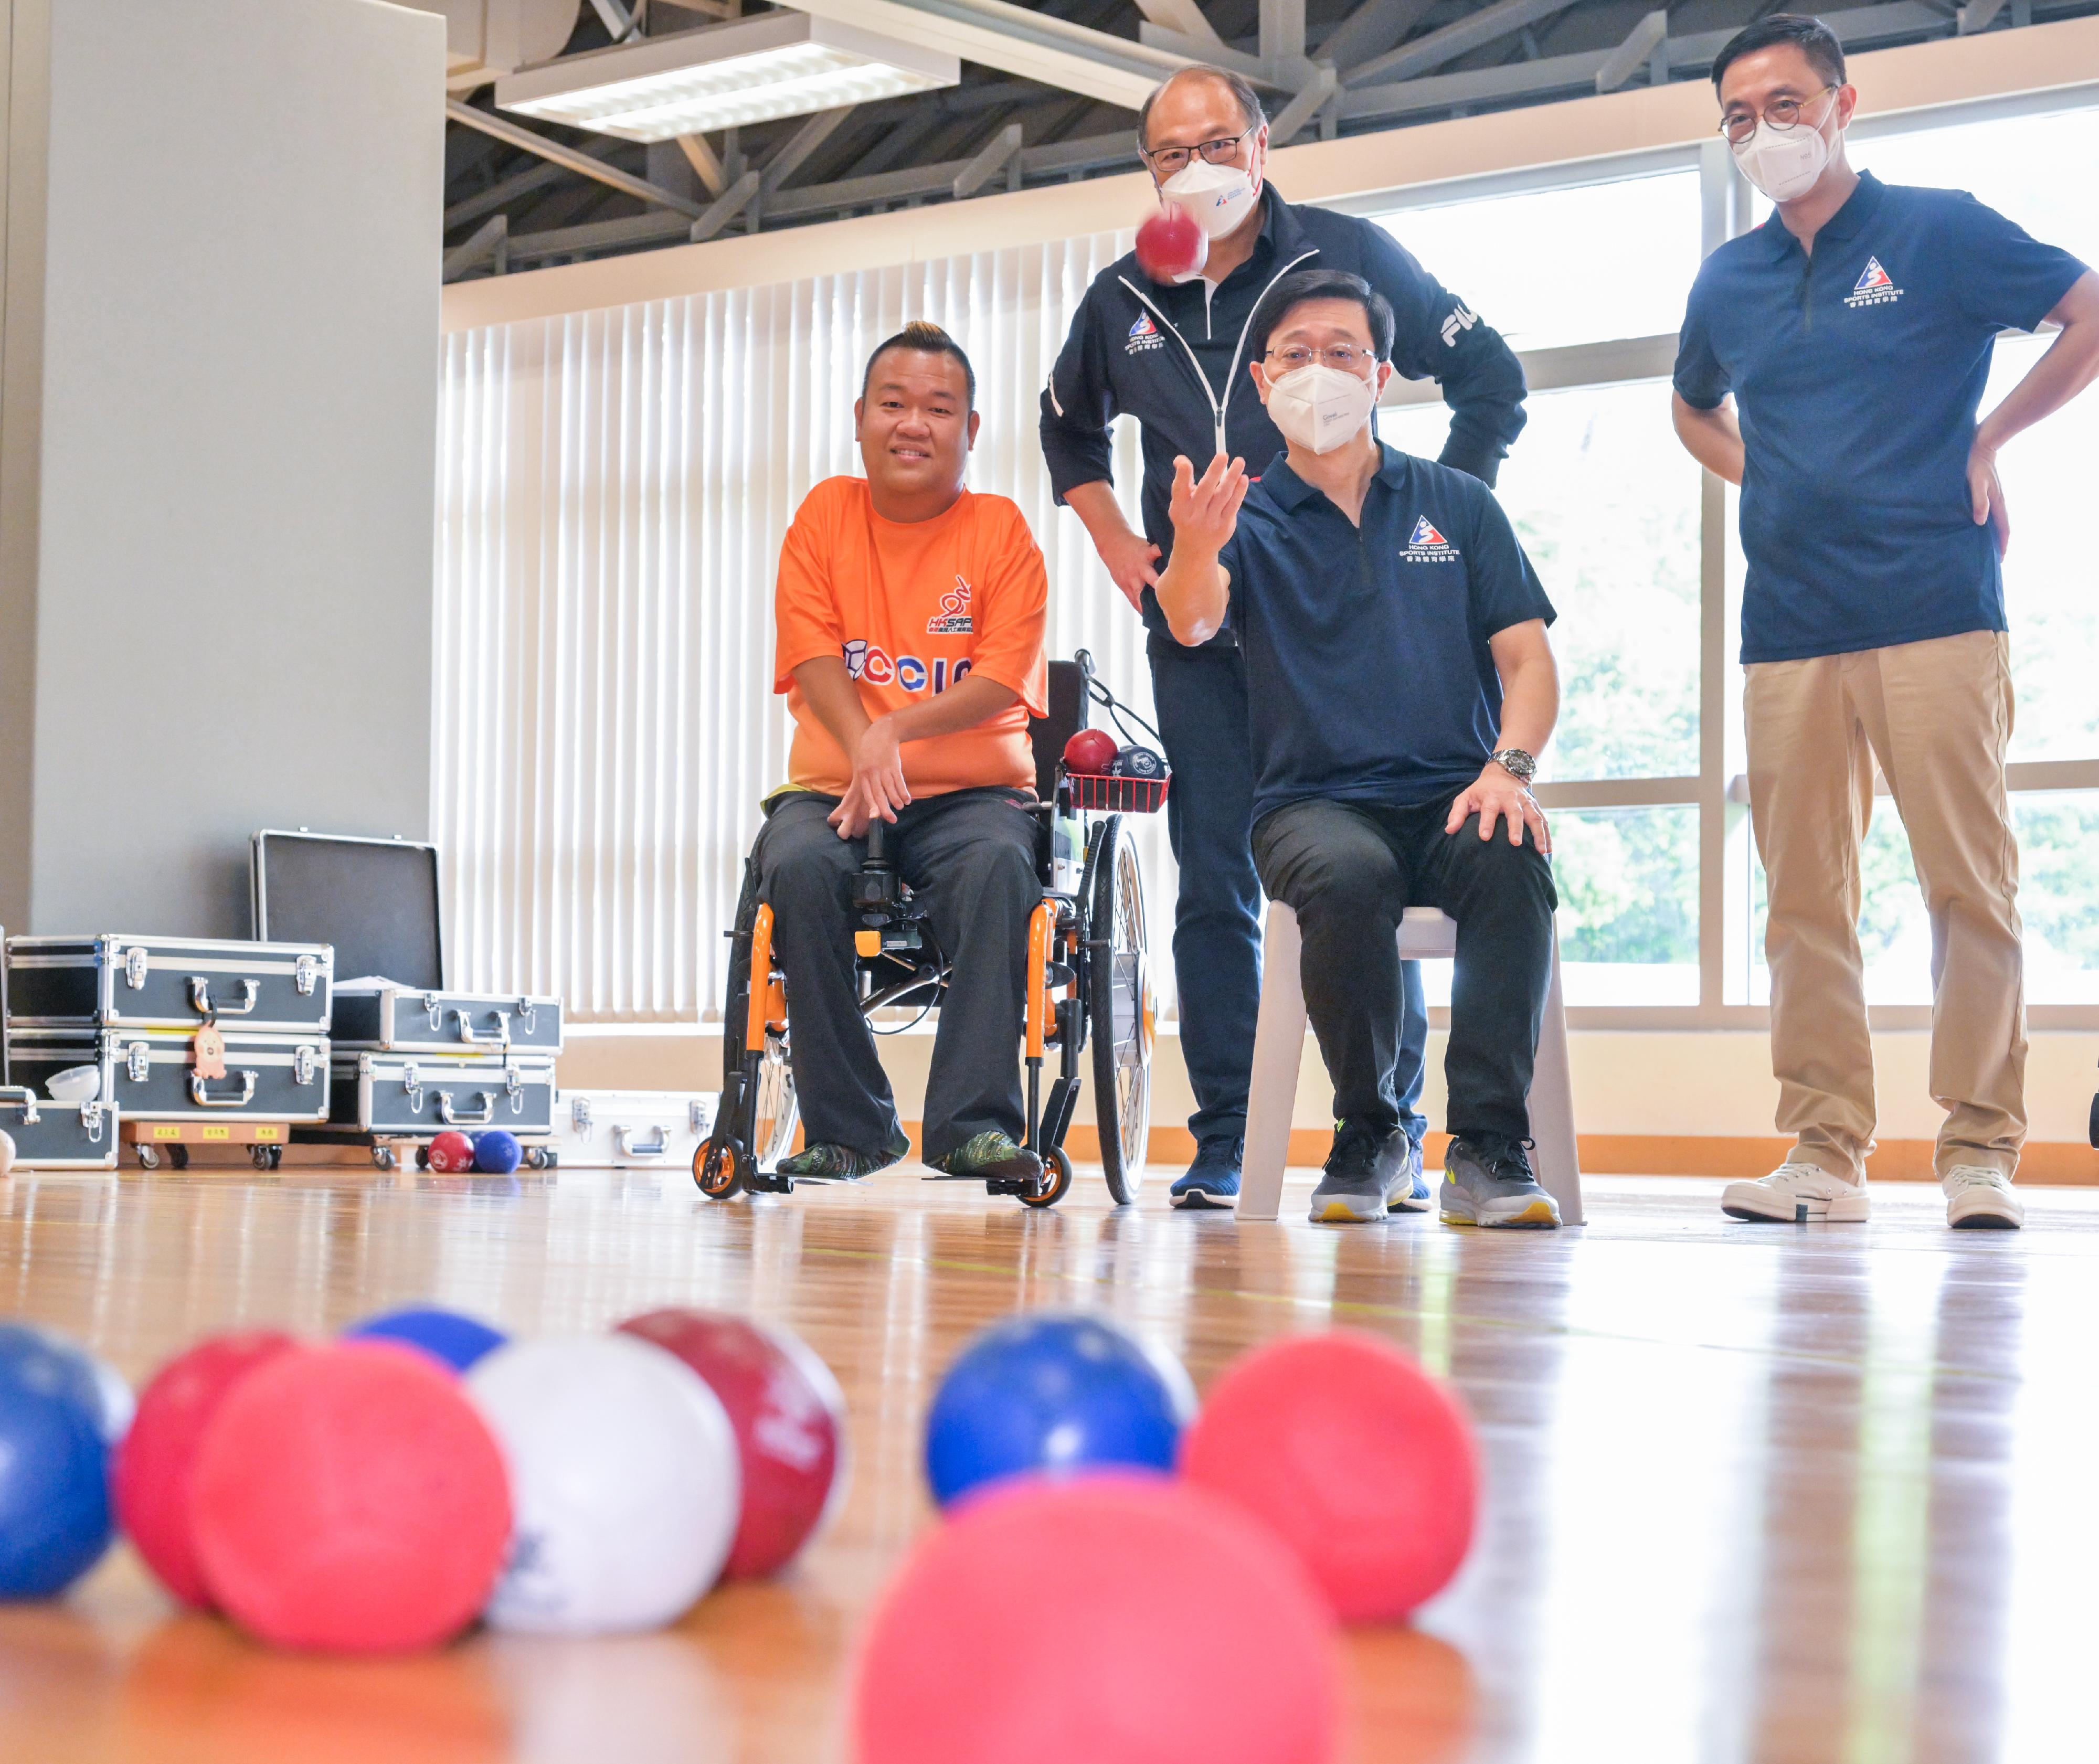 The Chief Executive, Mr John Lee, today (August 16) visited the Hong Kong Sports Institute (HKSI). Photo shows Mr Lee (front row, right), taking part in a boccia activity. Looking on are the Secretary for Culture, Sports and Tourism, Mr Kevin Yeung (back row, right), and the Chairman of the Board of Directors of the HKSI, Dr Lam Tai-fai (back row, left).